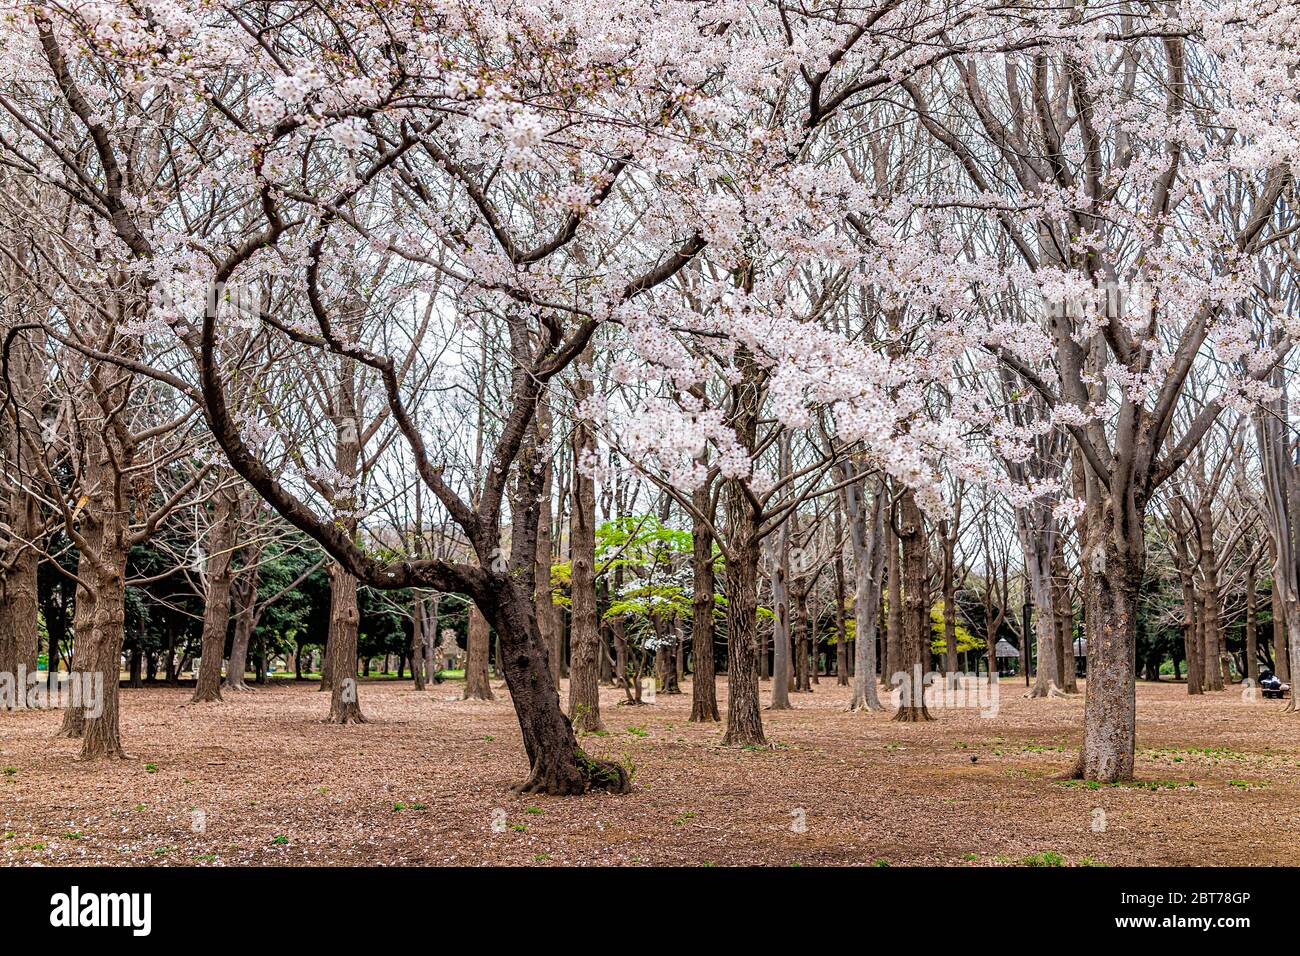 Tokyo, Japan Yoyogi park in Shibuya with pink white sakura flowers branches on cherry blossom trees in field Stock Photo